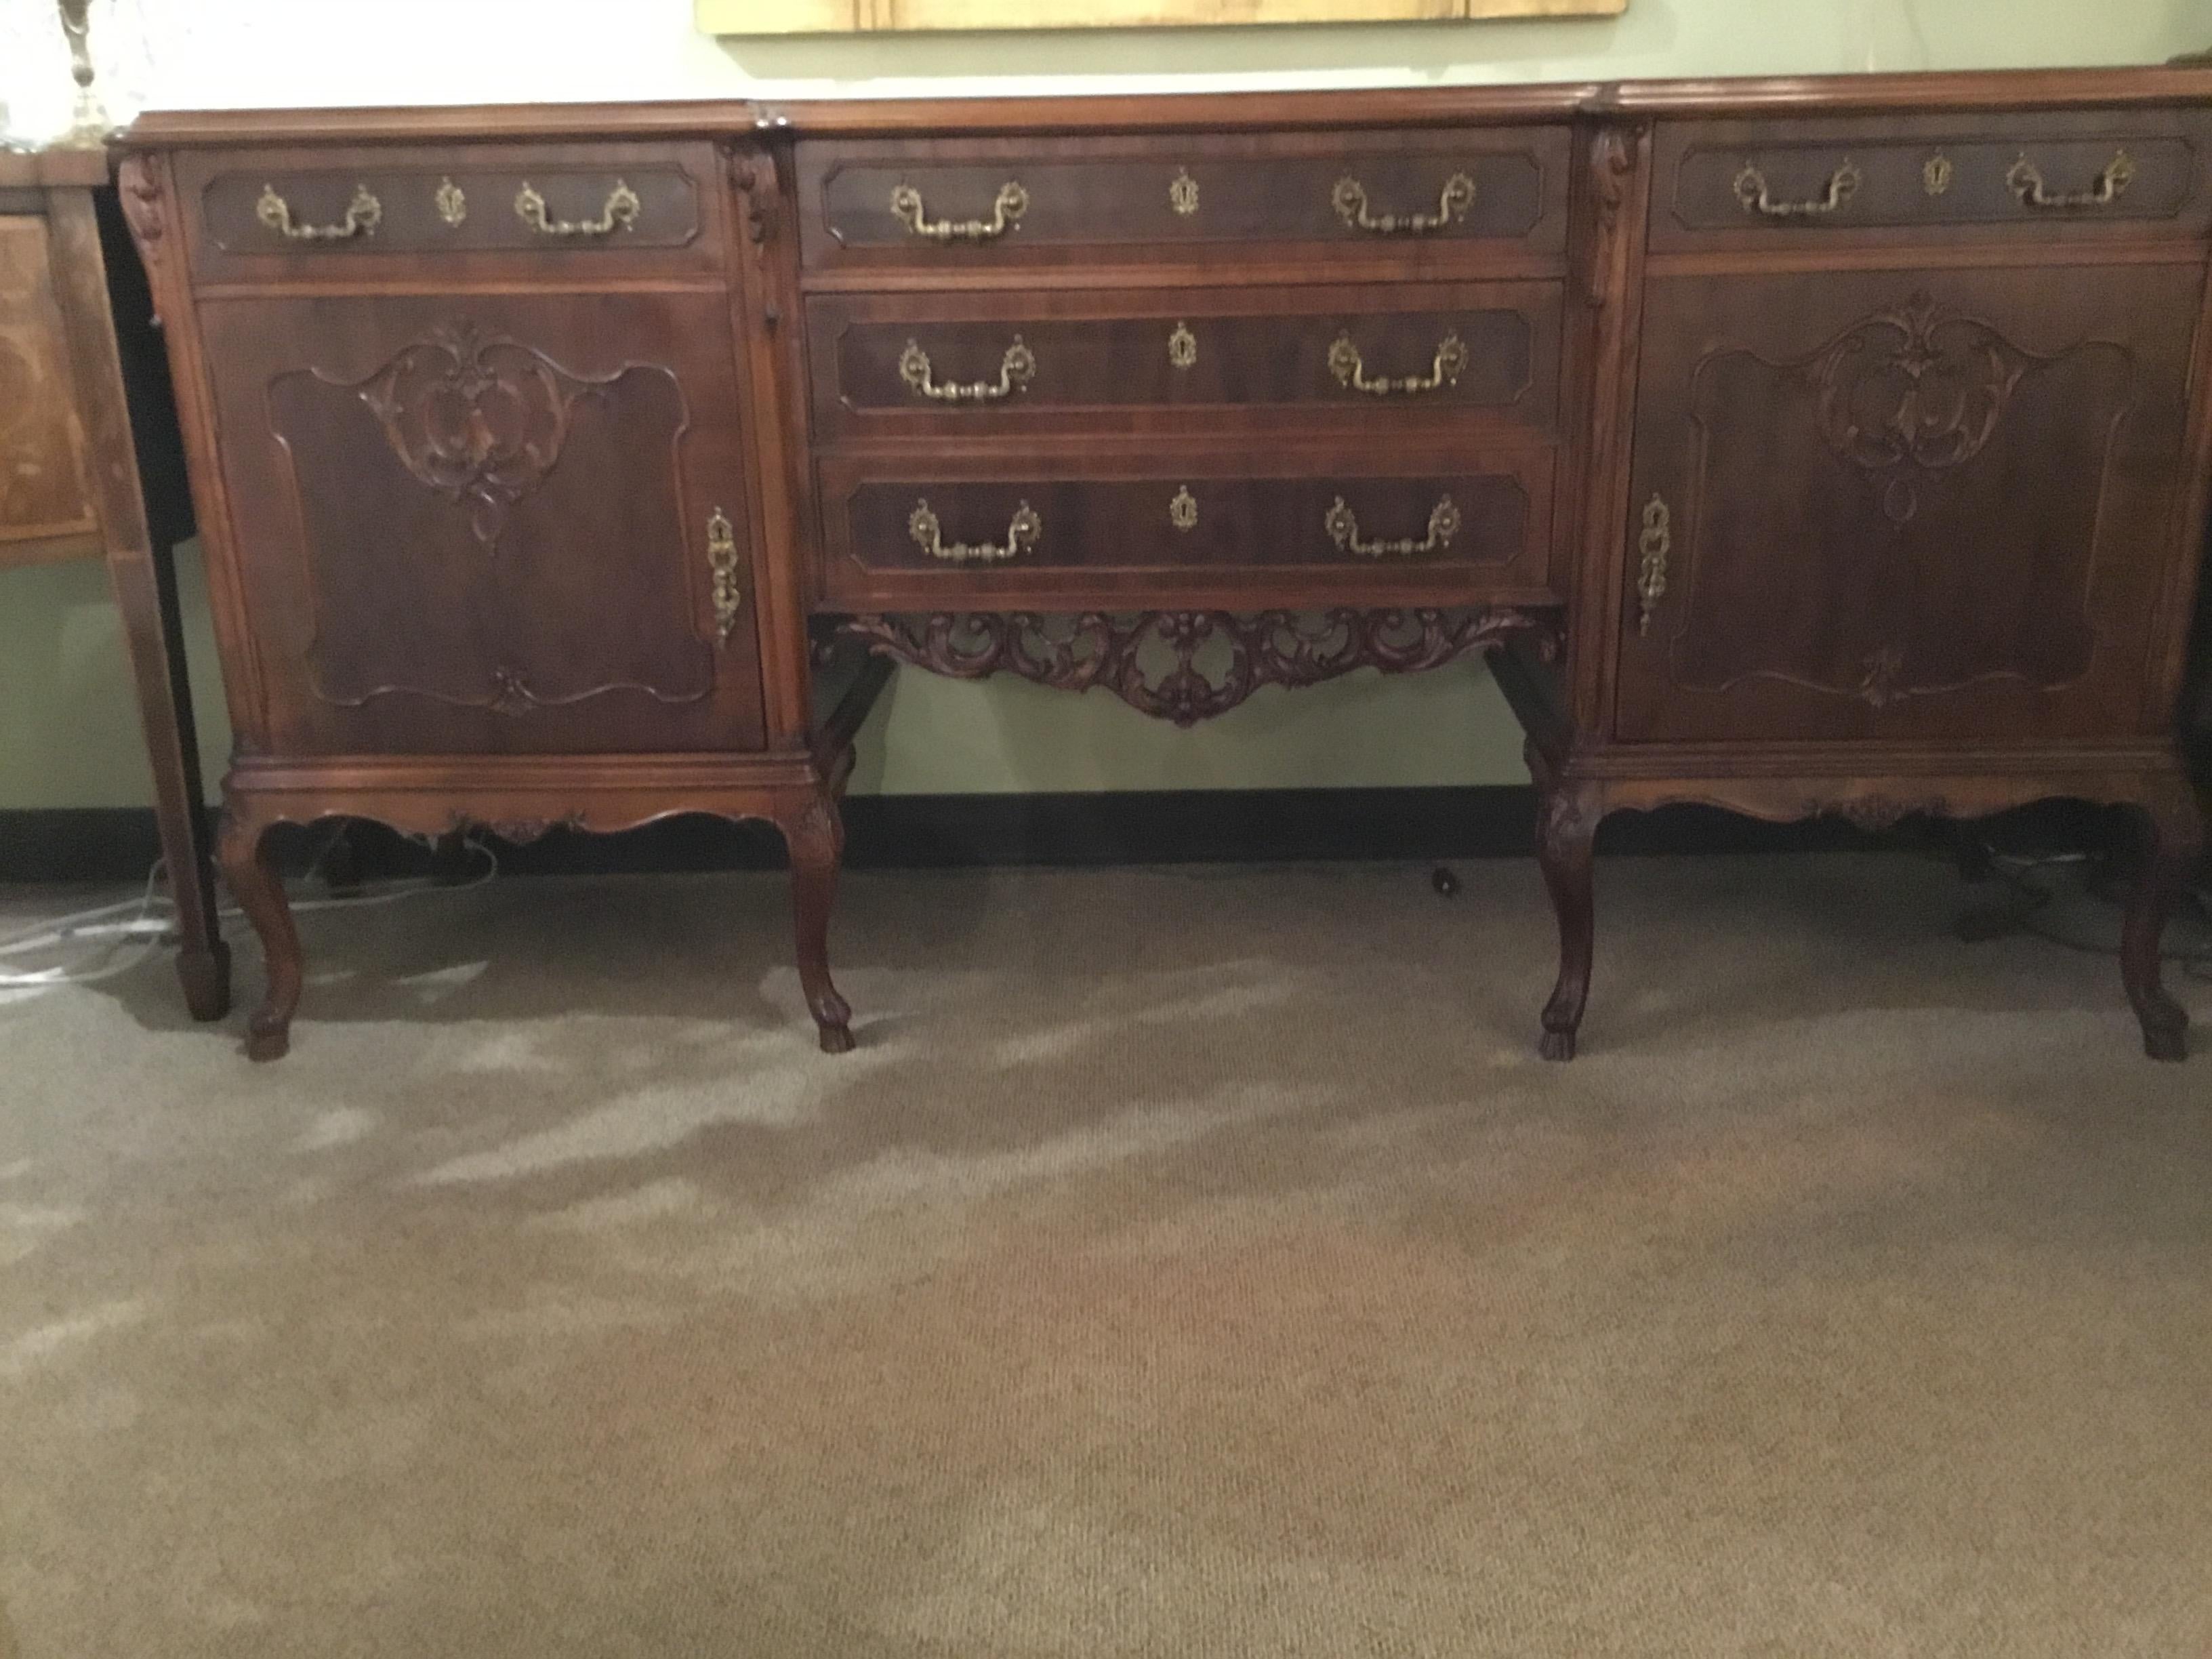 Handsome buffet with great storage. Two doors that open on each side
with three drawers down the center of the piece. Carved apron at the
center. Curved leg ending in a hoof foot.